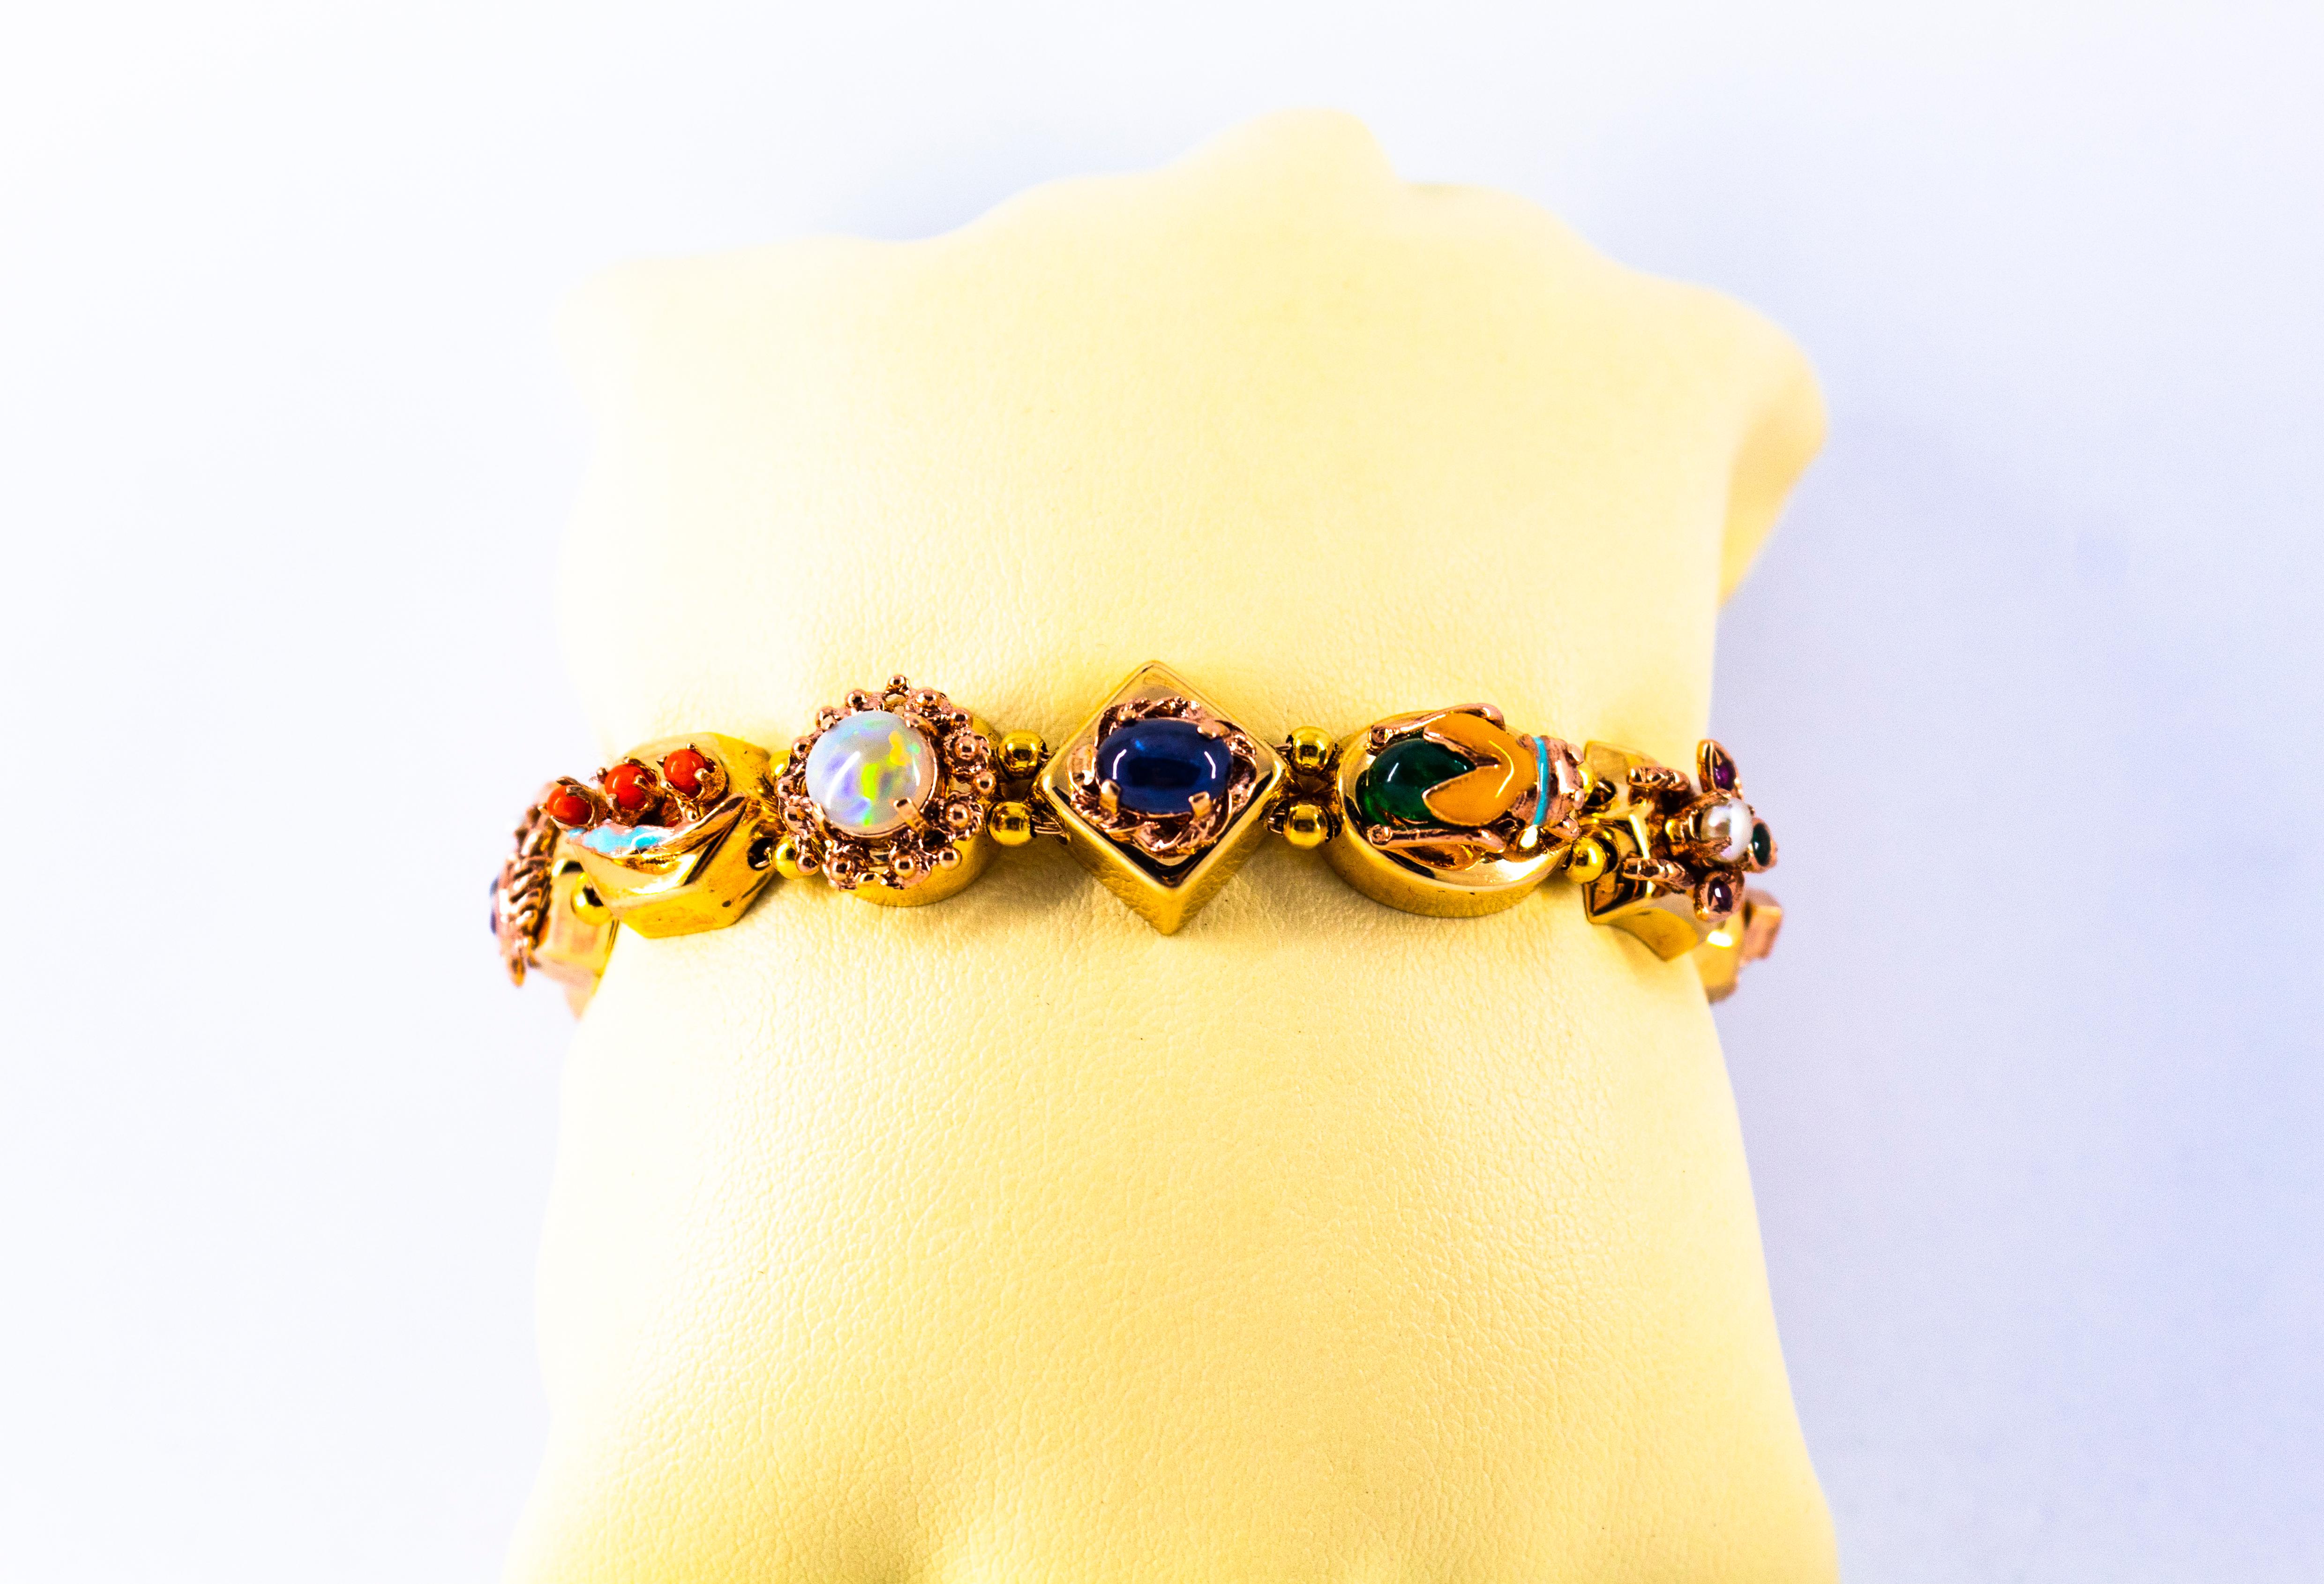 This bracelet is a real riot of colors and nature thanks to the intuition of Luigi Ferrara and all the precious stones.
This Bracelet is made of 9K Yellow Gold with 18K Yellow Gold Beads.
This Bracelet has 0.50 Carats of Rubies
This Bracelet has